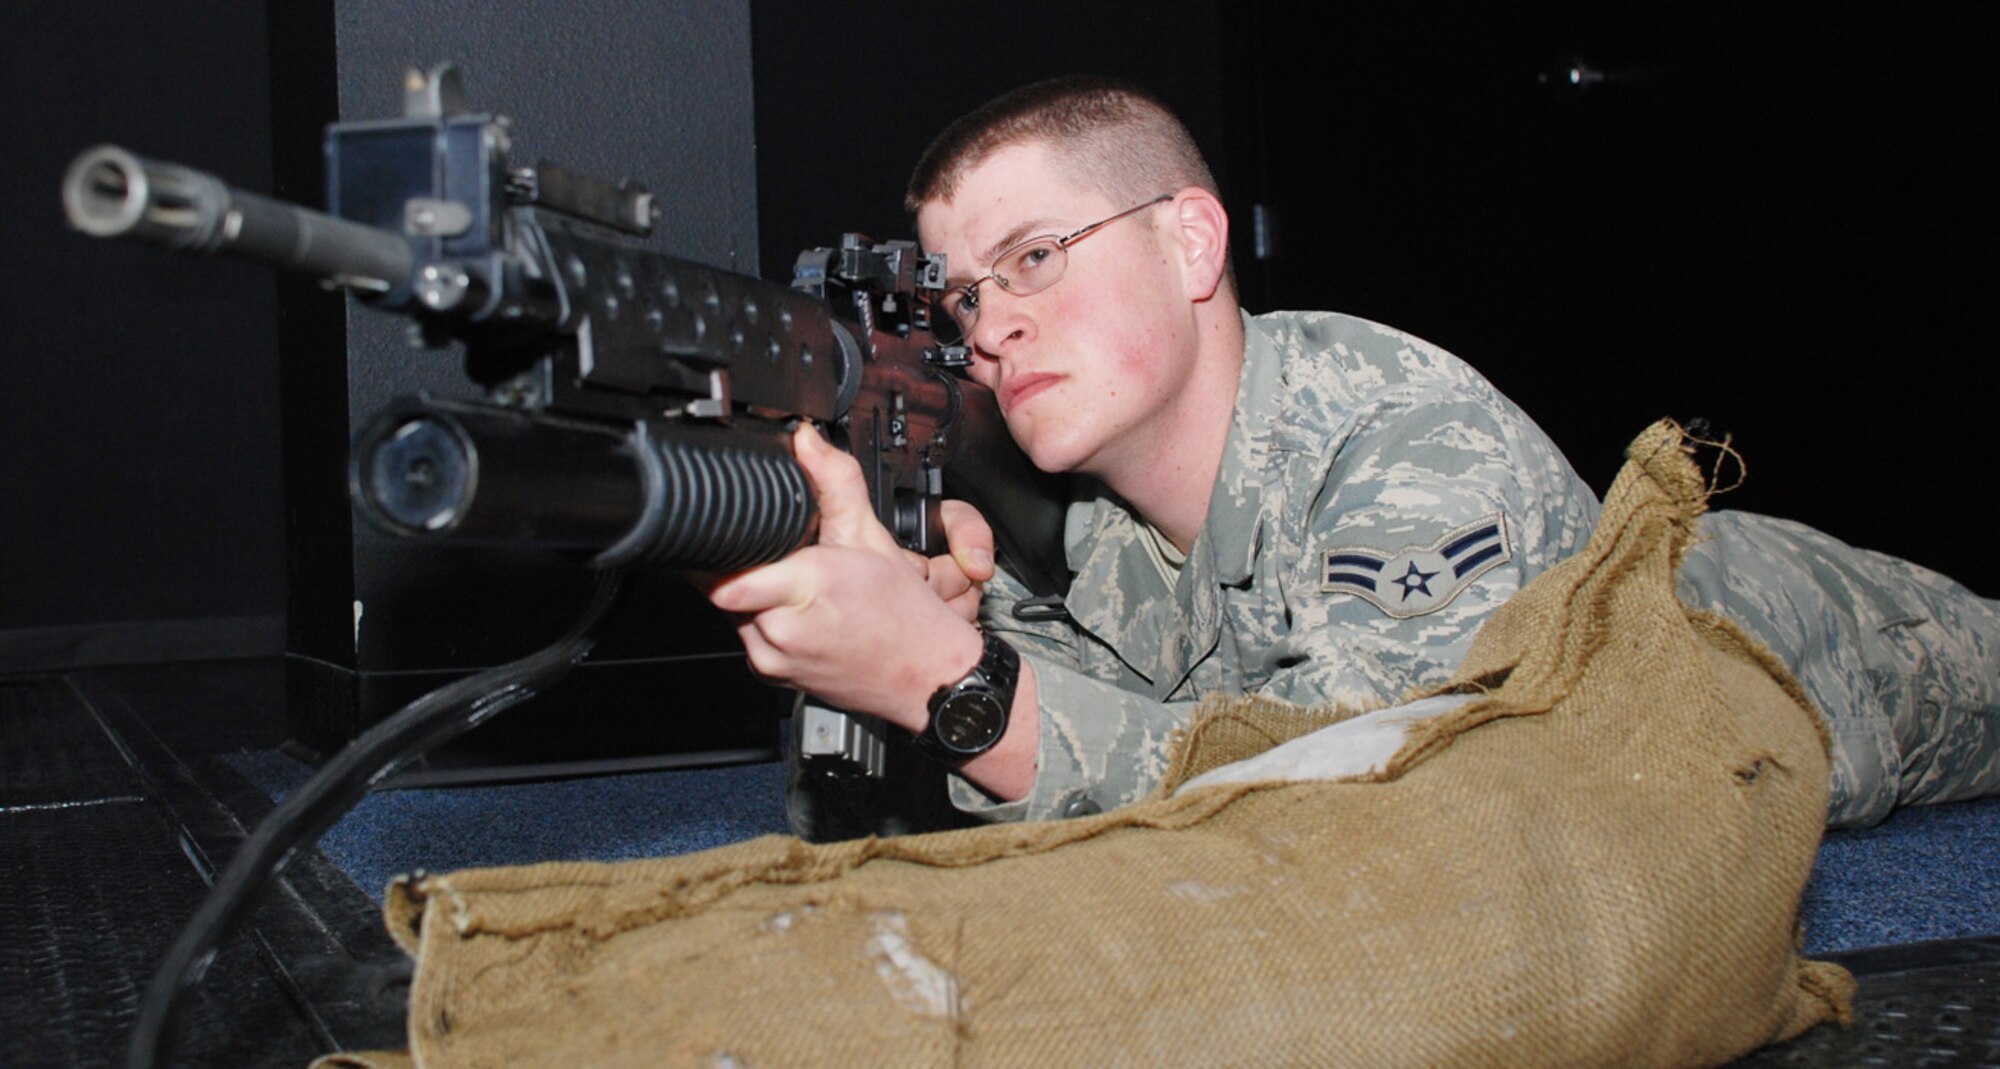 Airman 1st Class Timothy Johnson, 790th Missile Security Forces Squadron, aims his weapon at the screen during a session at the firearm training simulator March 10. Airmen within the 790th MSFS practiced their accuracy during the training.